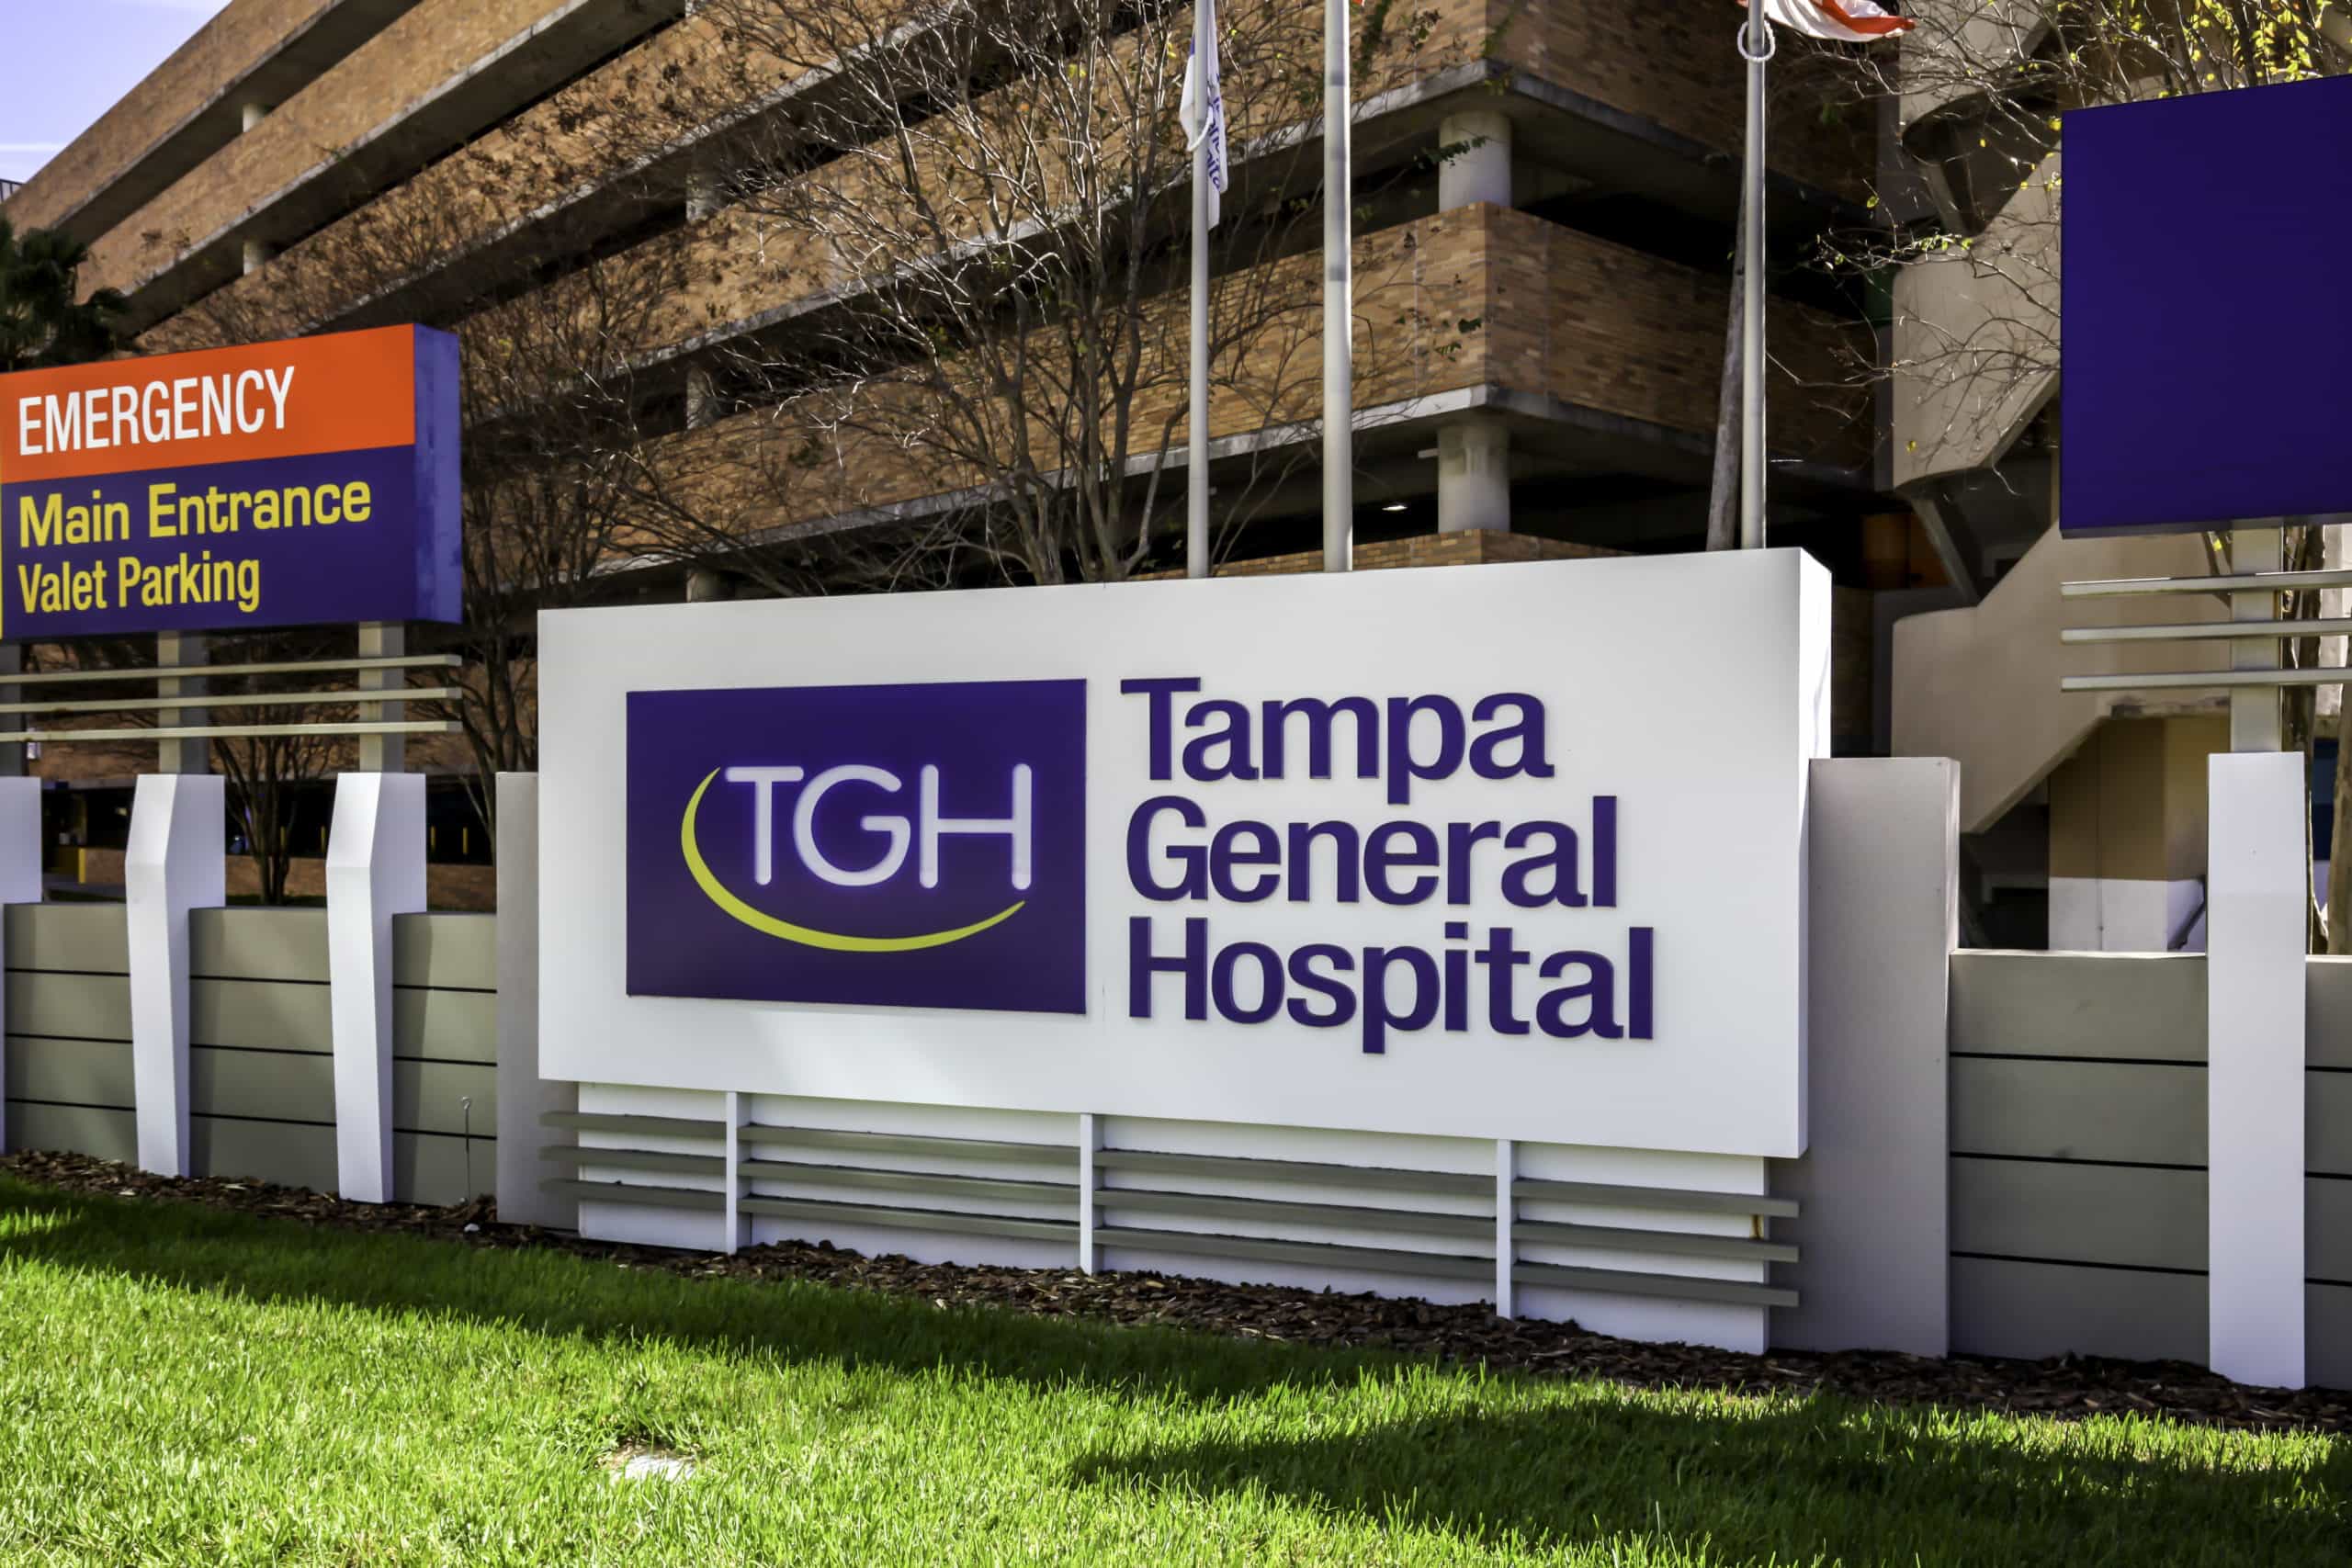  Tampa General passes $120M in contributions to transform health care through innovation 